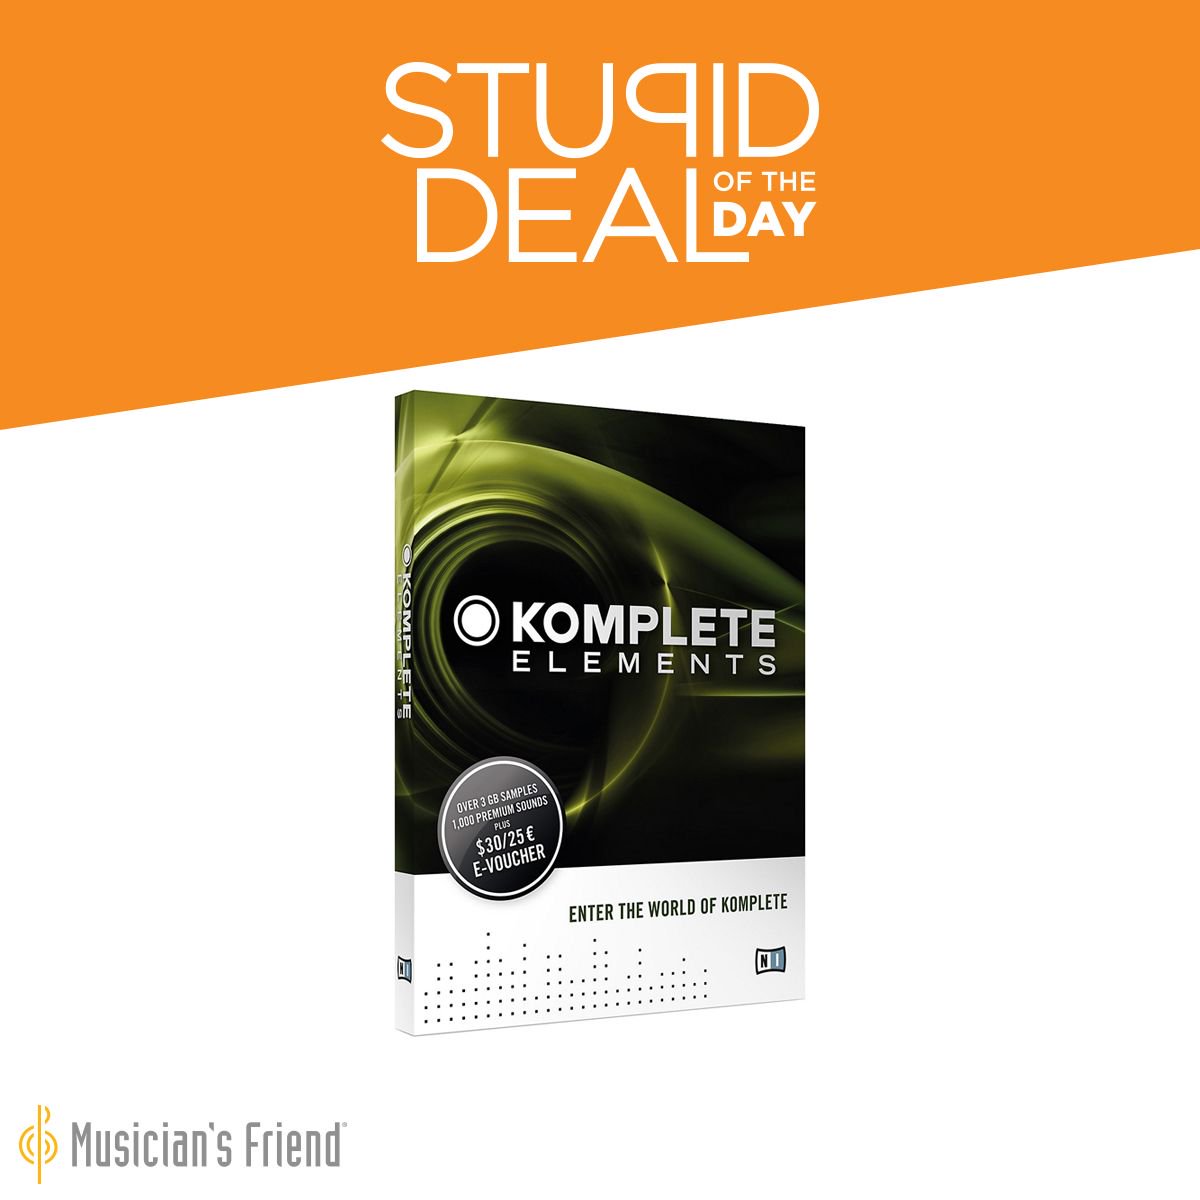 Musician S Friend On Twitter Stupid Deal Of The Day 1 11 17